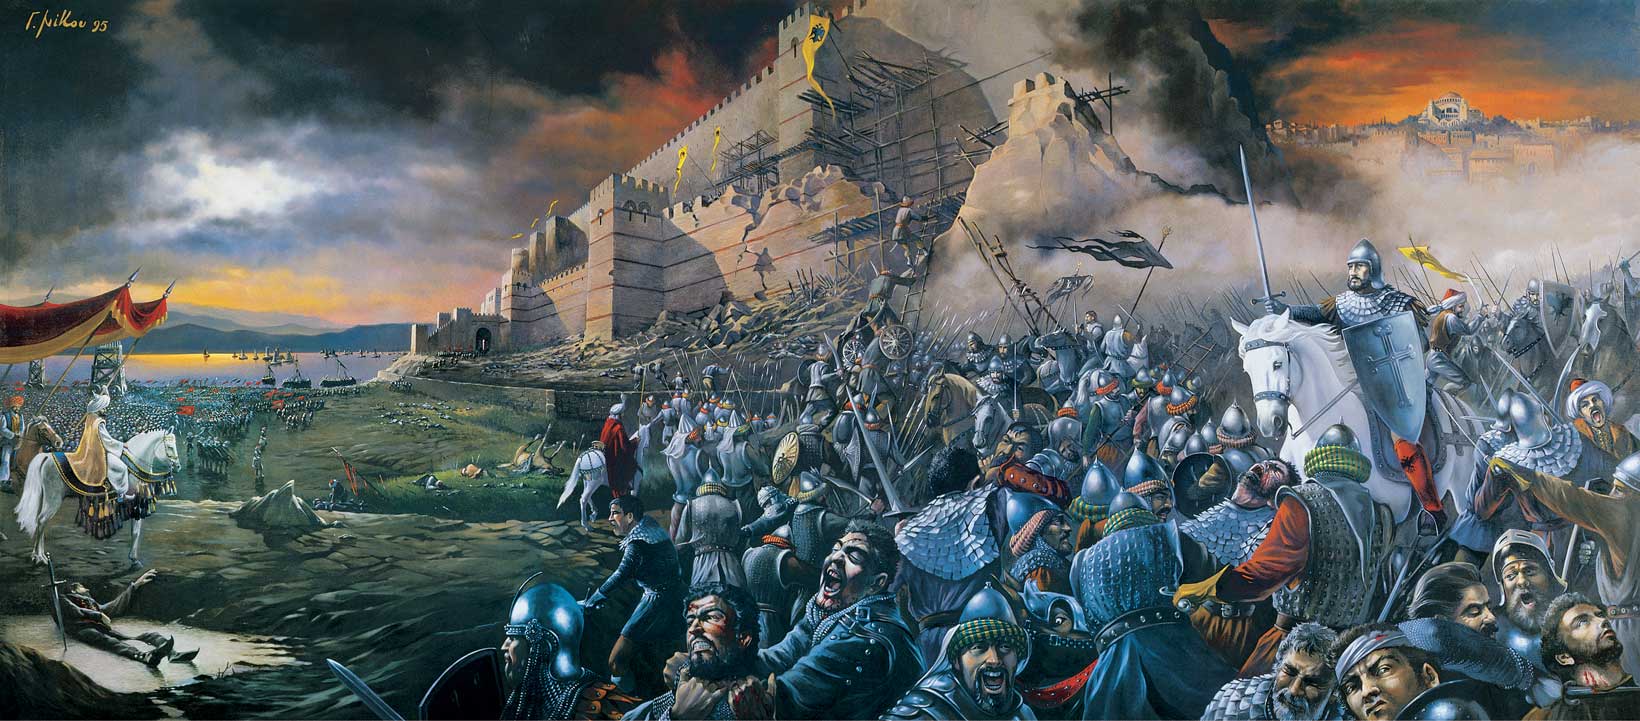 A tale of blood and slaughter: the fall of Constantinople